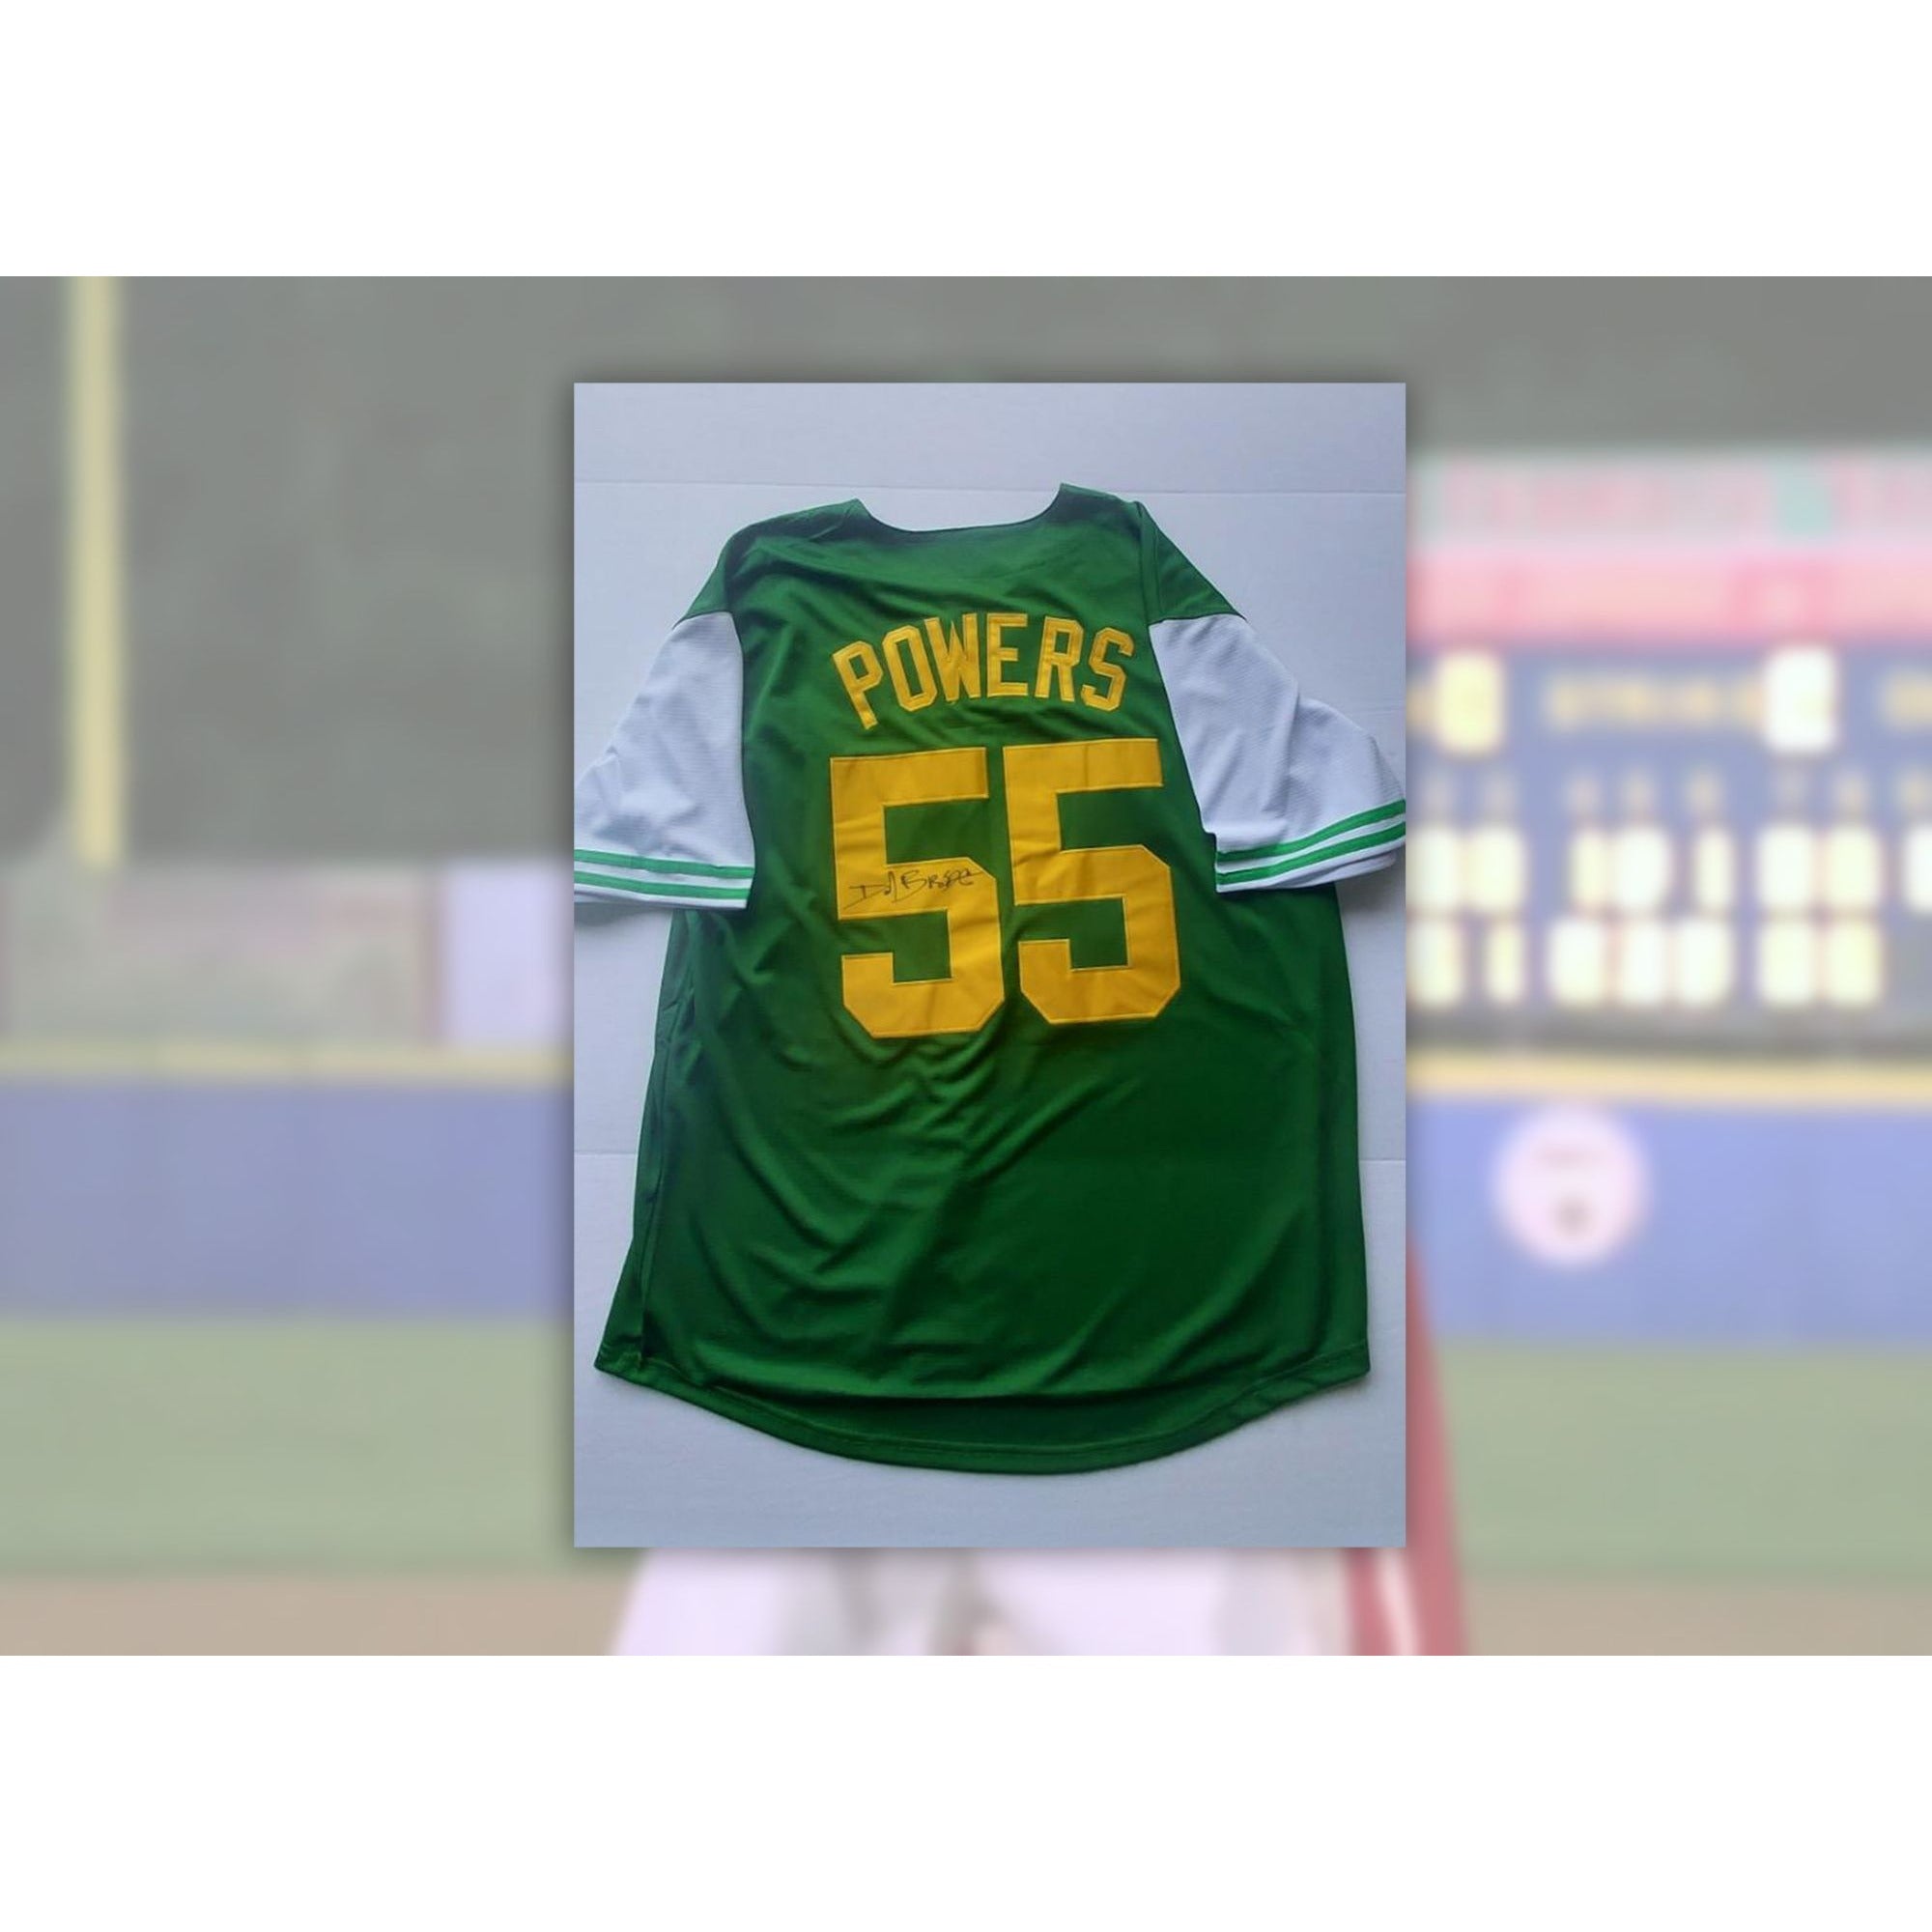 Danny McBride, Kenny Powers, Eastbound and Down Charros signed baseball jersey XL signed with proof